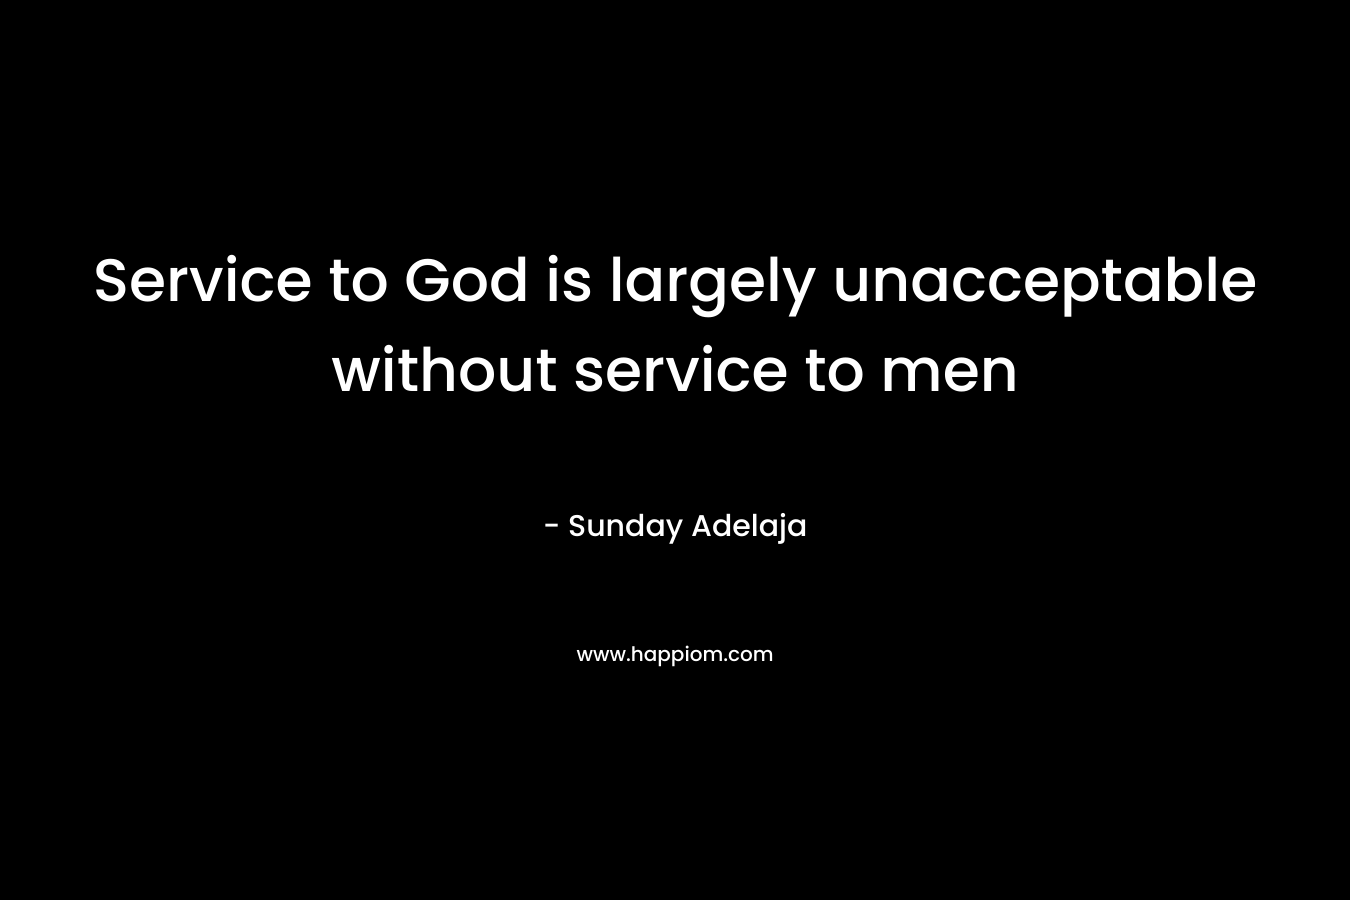 Service to God is largely unacceptable without service to men